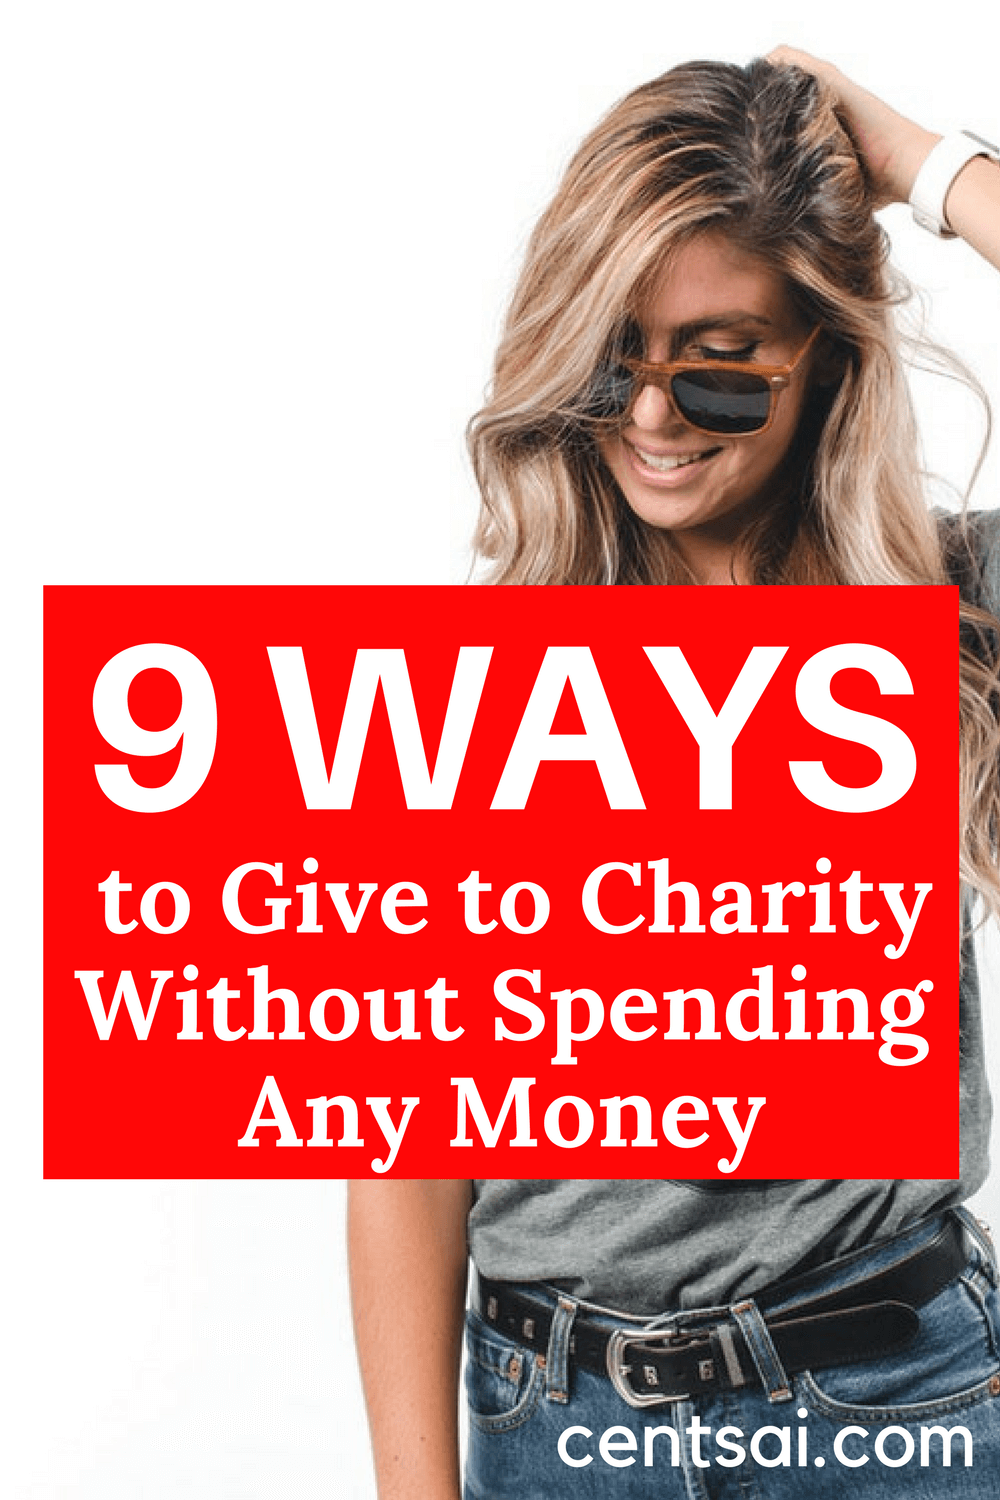 9 Ways to Give to Charity Without Spending Any Money